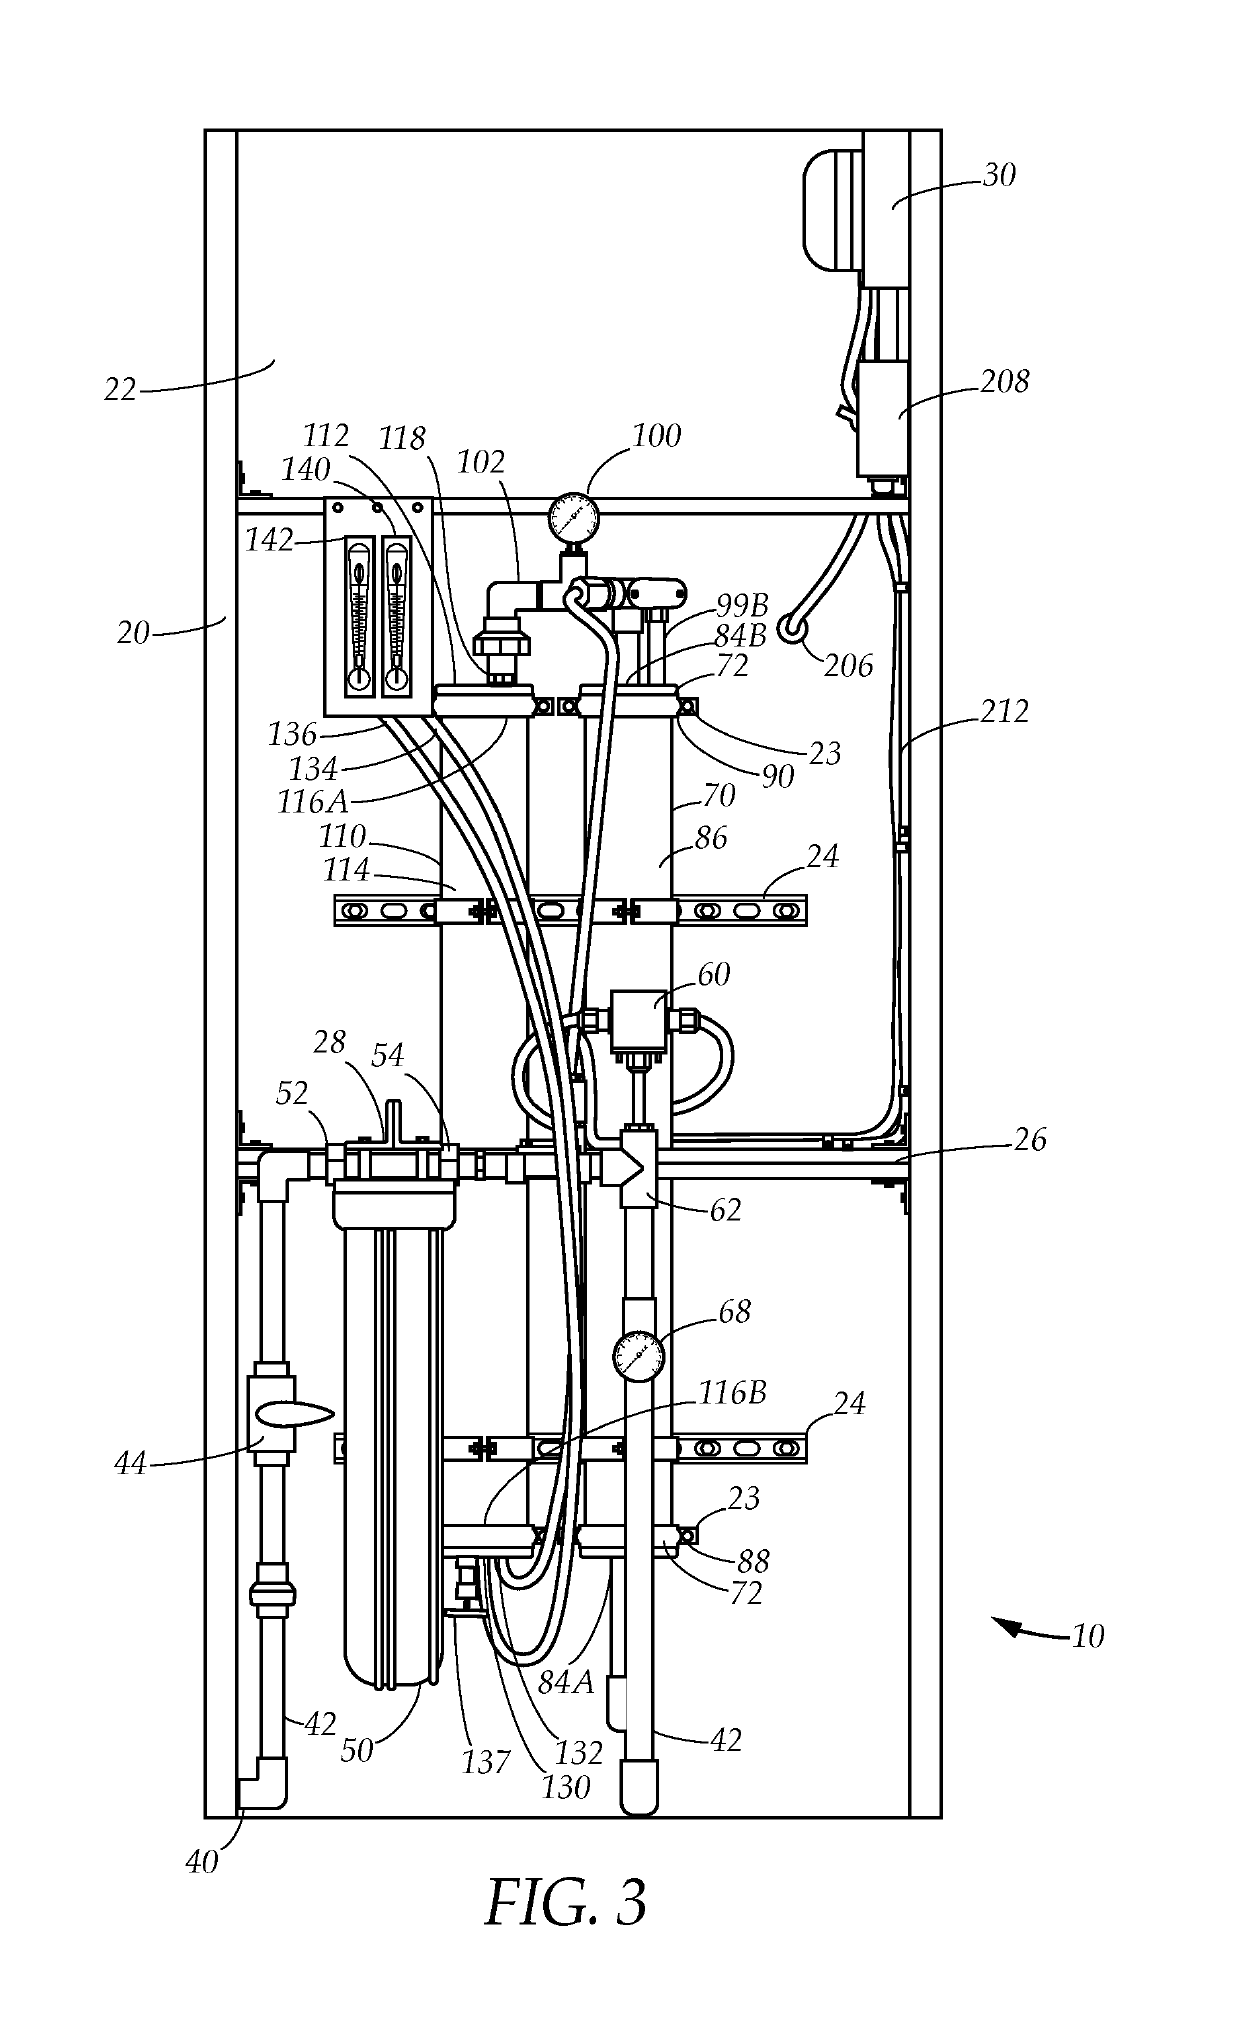 Pump-assisted water filtration system